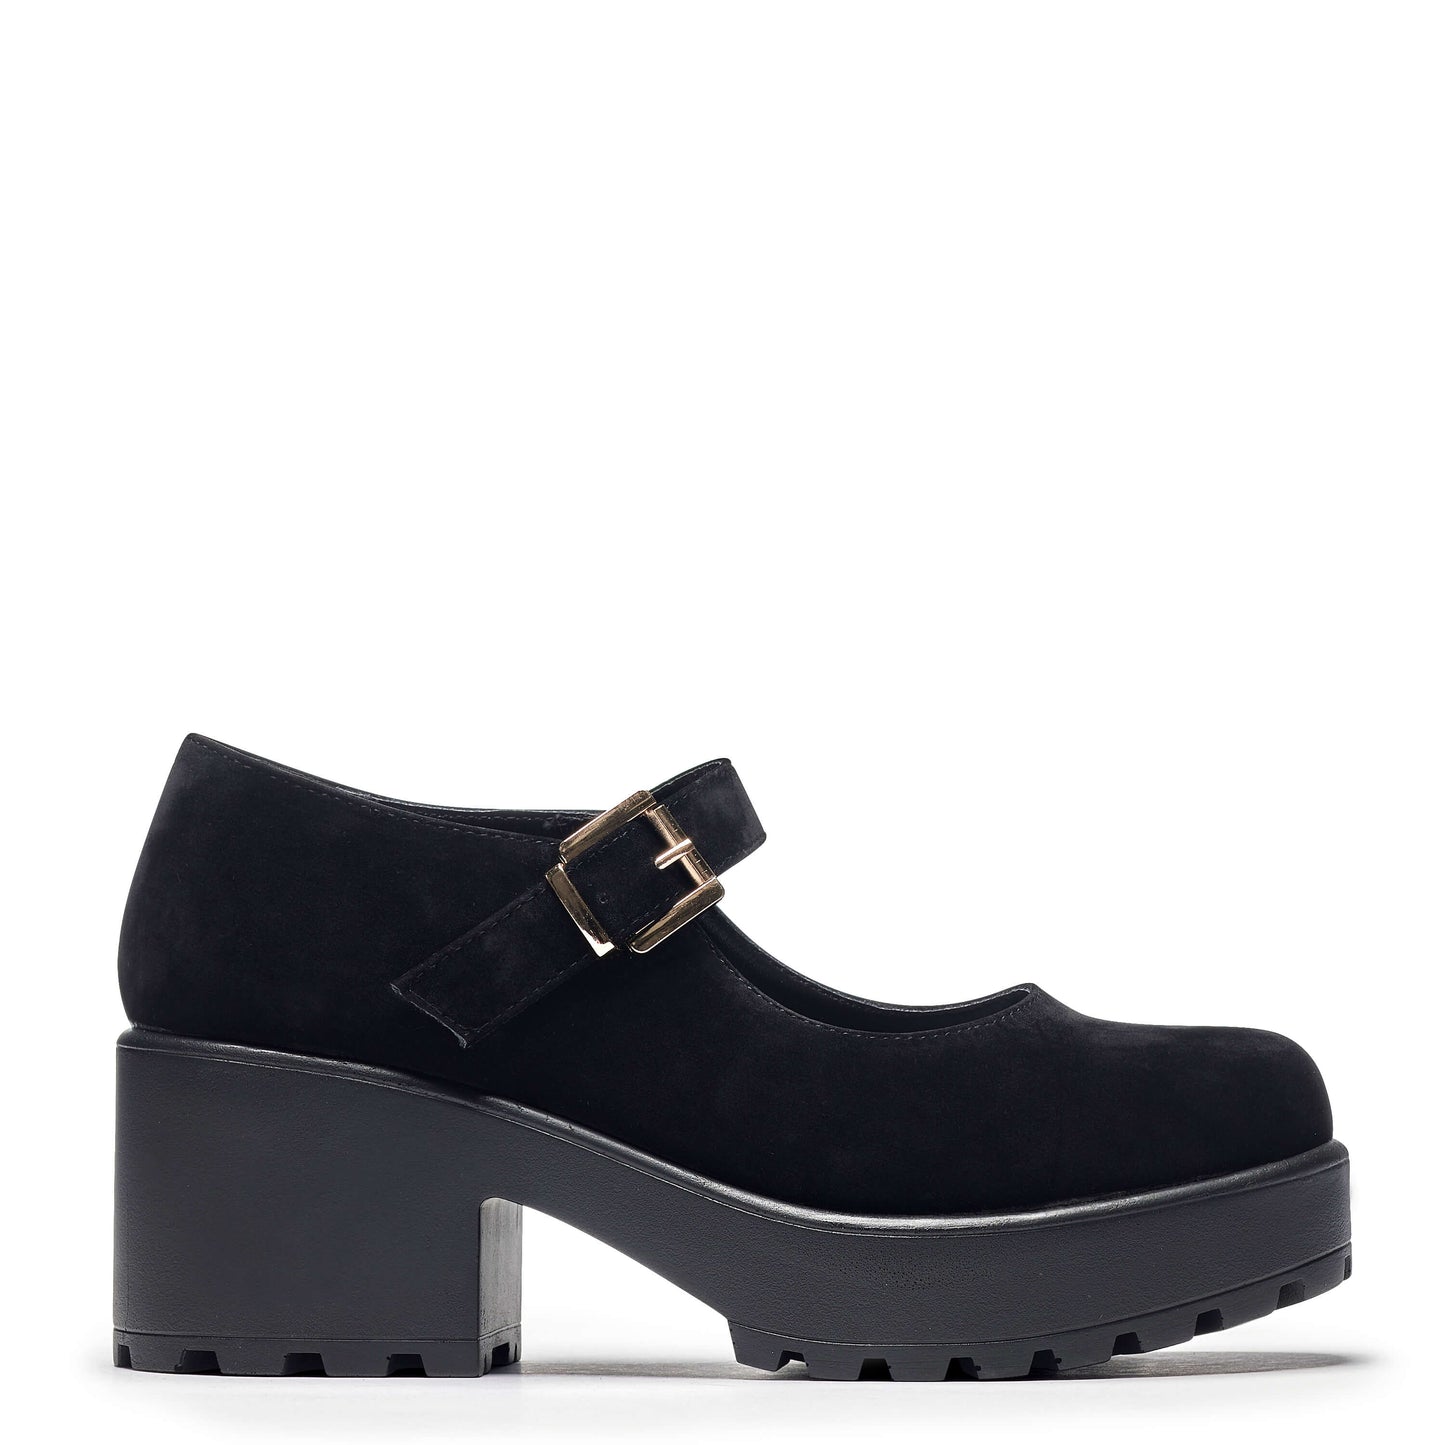 TIRA Black Mary Jane Shoes 'Suede Edition' - Mary Janes - KOI Footwear - Black Suede - Side View